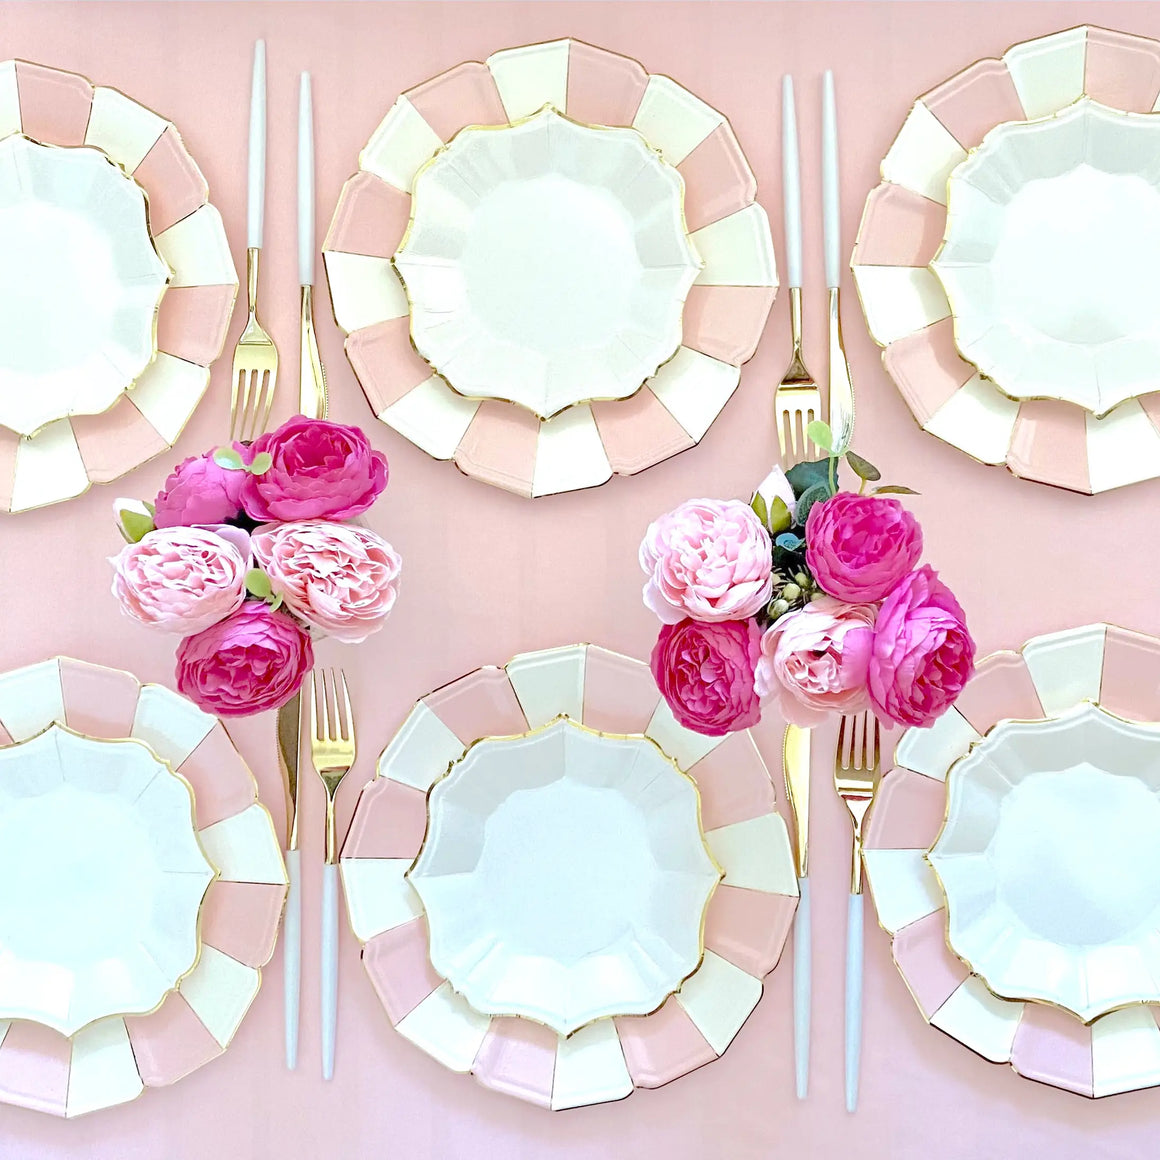 PLATES - DINNER SCALLOPED PINK + WHITE CANDY